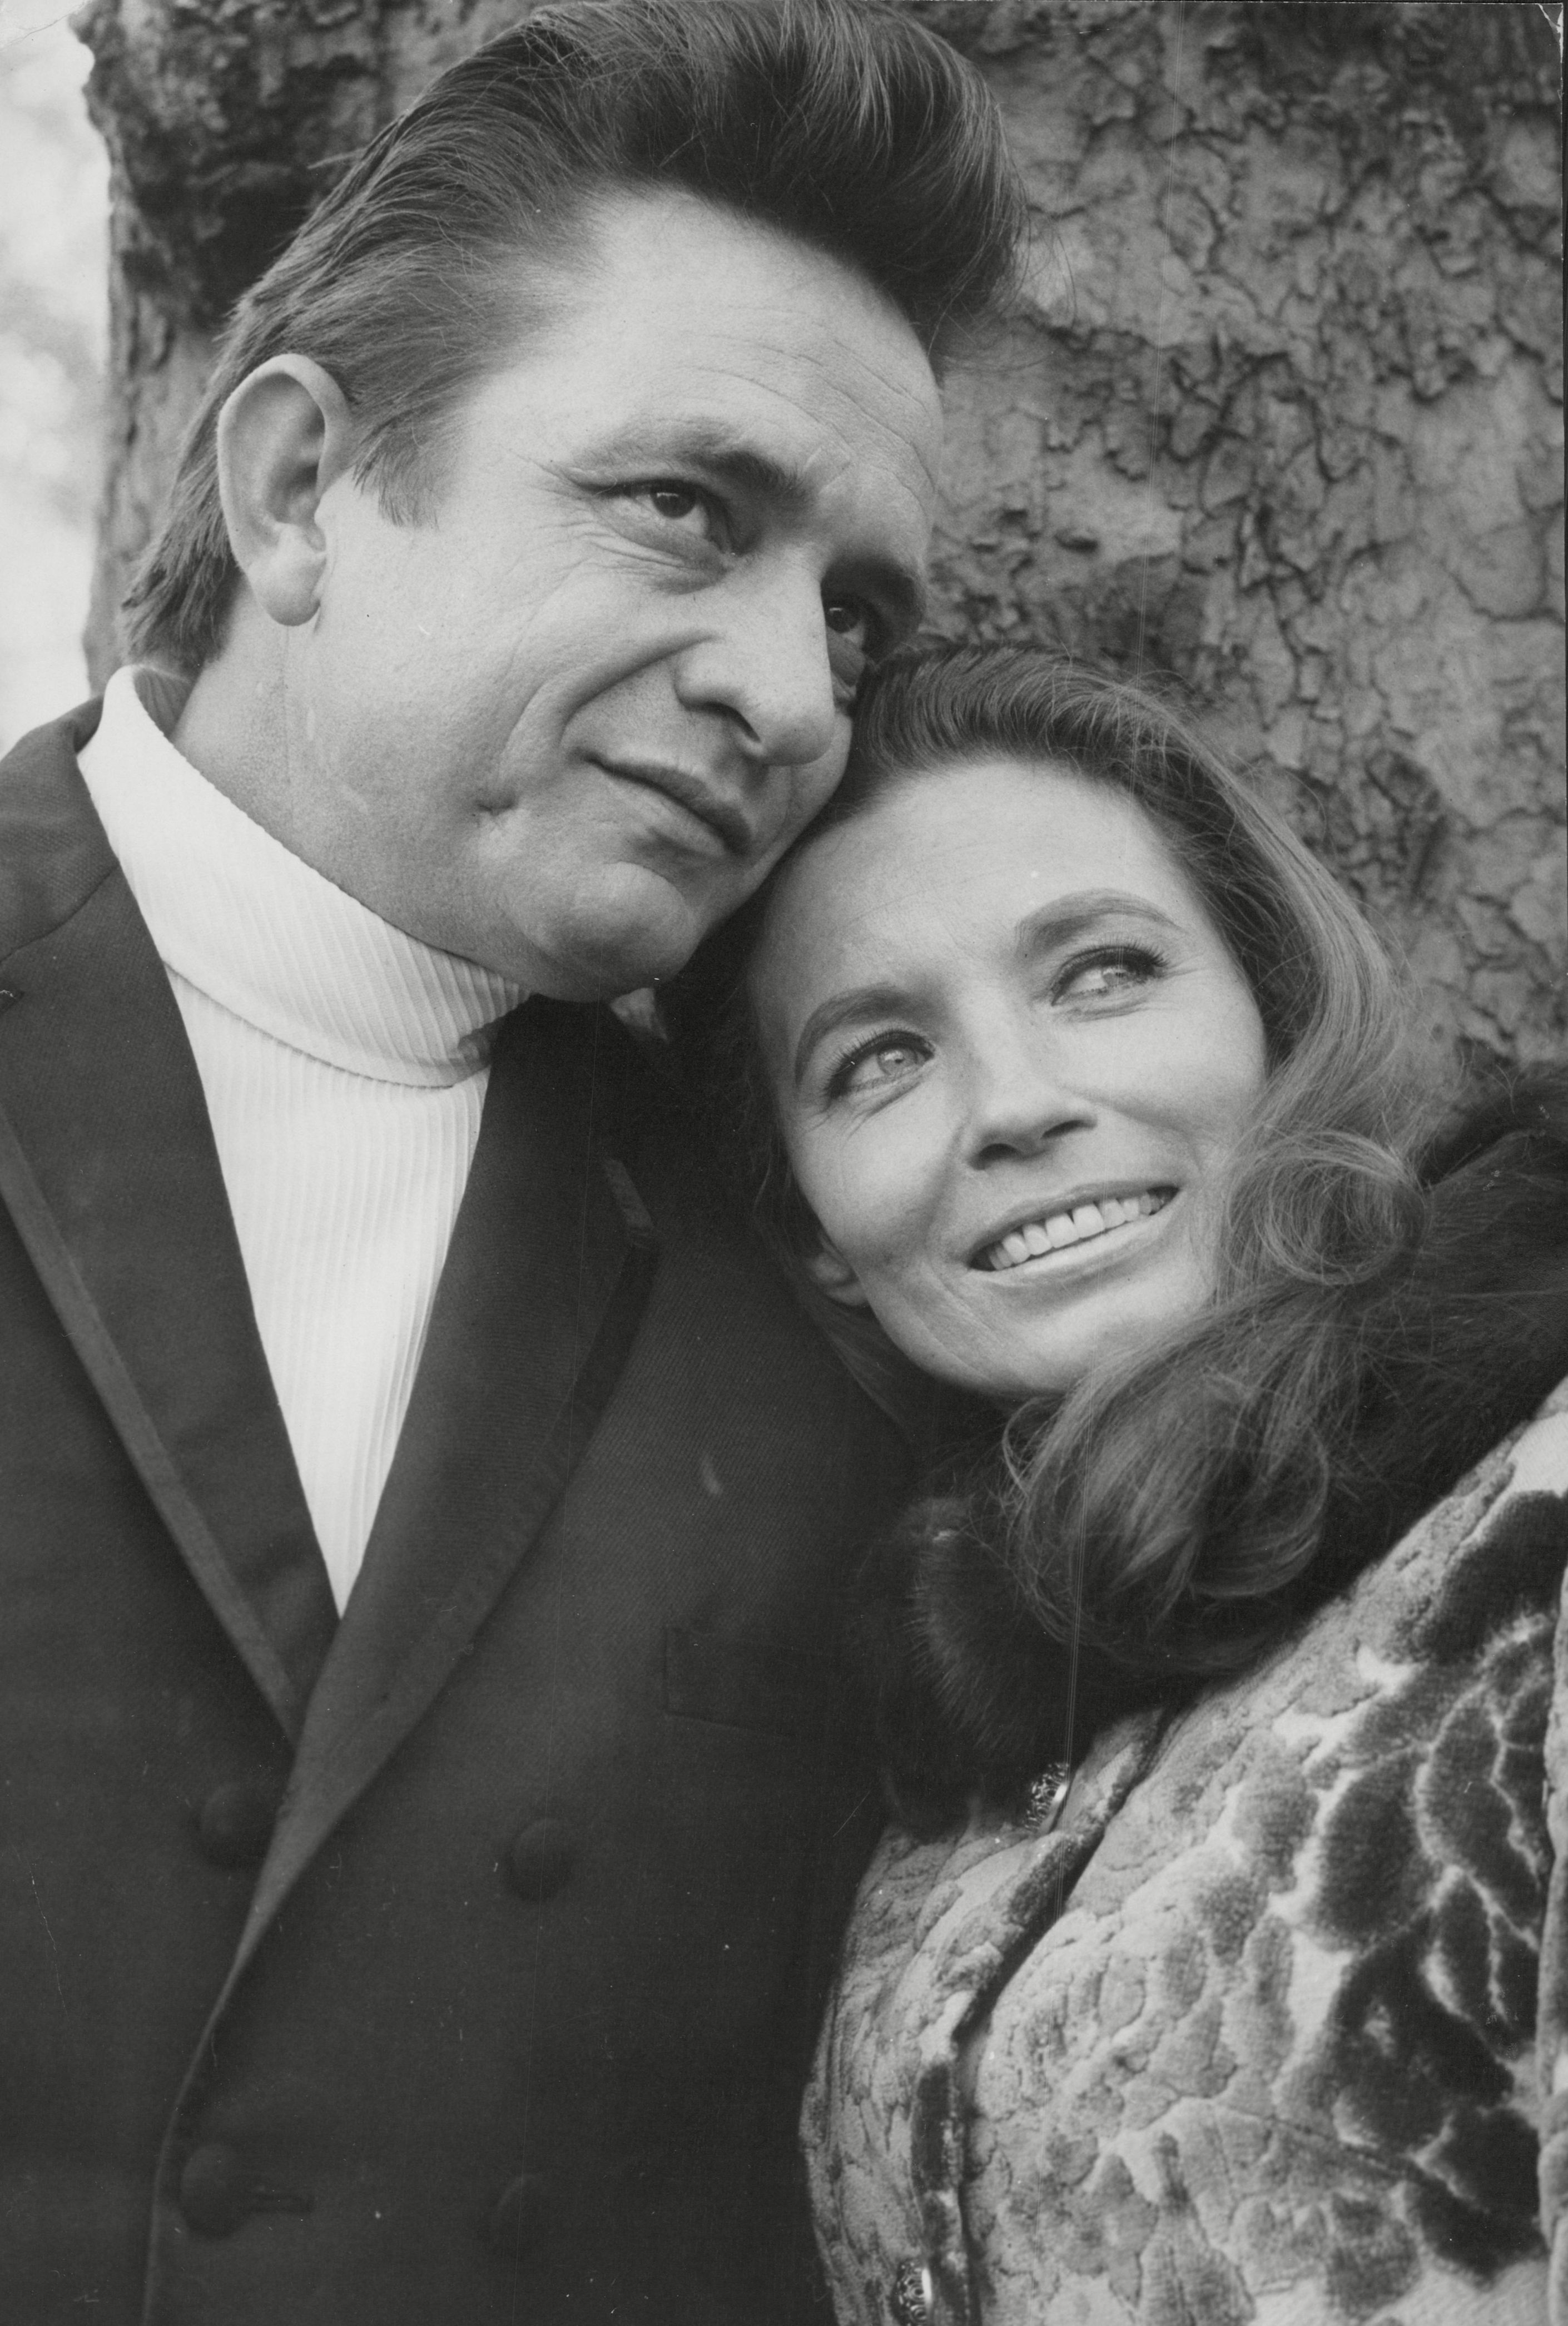 <p>Though the 2005 biopic "Walk the Line" blurred the lines between Johnny Cash's real life and the Hollywood version of it, the fact remains that when he met the love of his life, June Carter, they were both married to other people. While June shortly thereafter divorced her first husband, country singer Carl Smith, Johnny remained married to his first wife, Vivian, for years before finally divorcing her in 1966. June wrote the ode to her relationship with Johnny, "Ring of Fire," in 1963 and married him in 1968.</p>